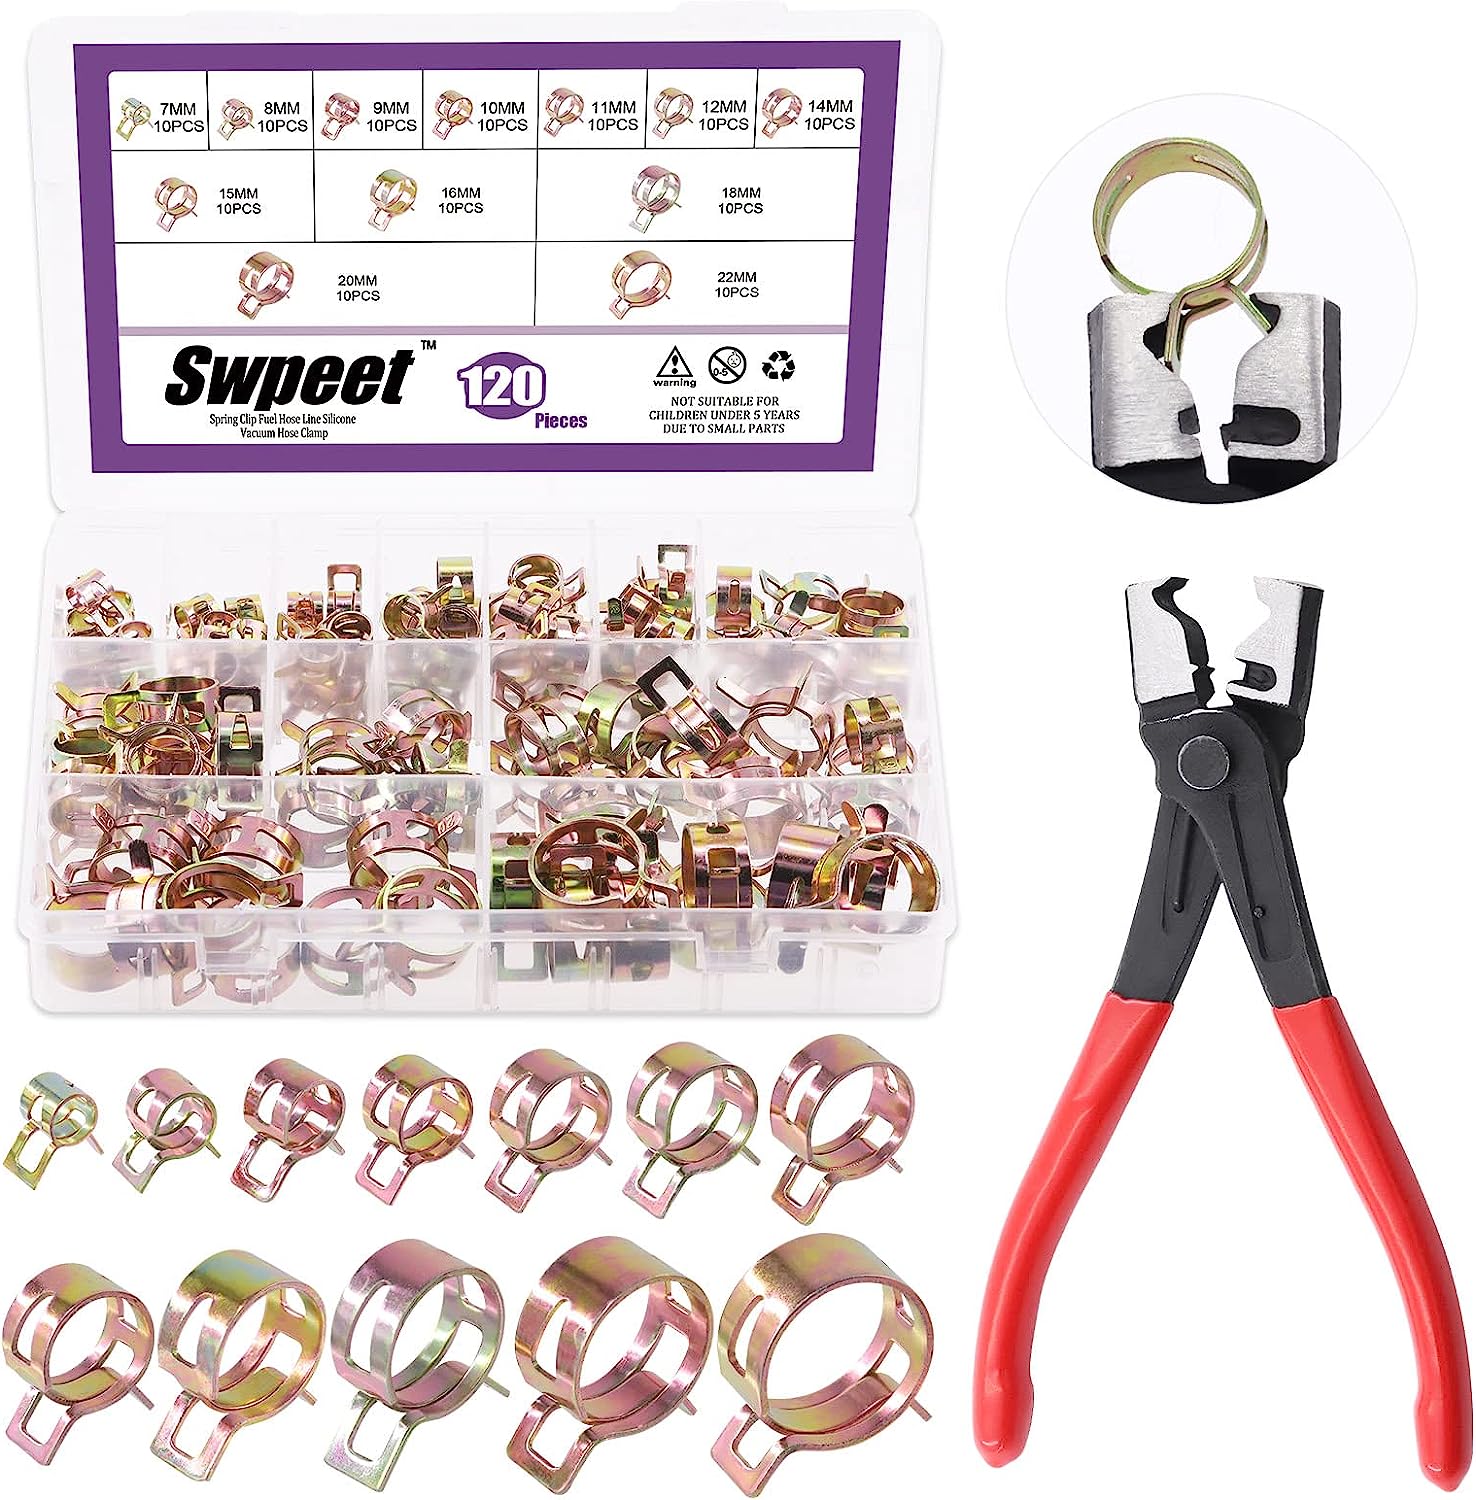 Swpeet 121Pcs 7-22mm Spring Band Hose Clamps with CV [...]